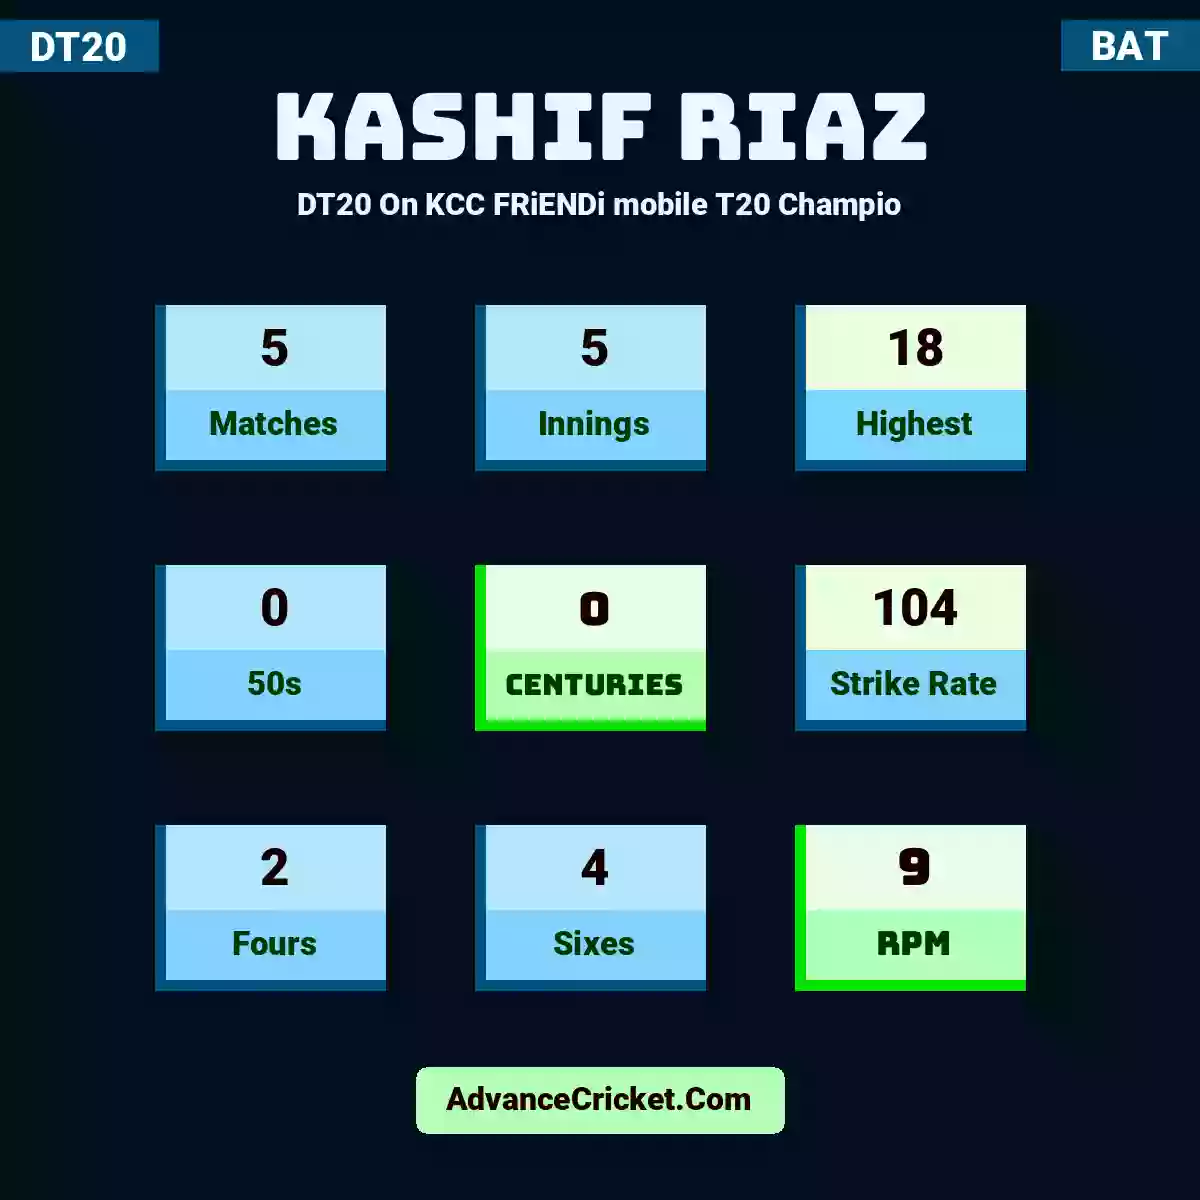 Kashif Riaz DT20  On KCC FRiENDi mobile T20 Champio, Kashif Riaz played 5 matches, scored 18 runs as highest, 0 half-centuries, and 0 centuries, with a strike rate of 104. K.Riaz hit 2 fours and 4 sixes, with an RPM of 9.